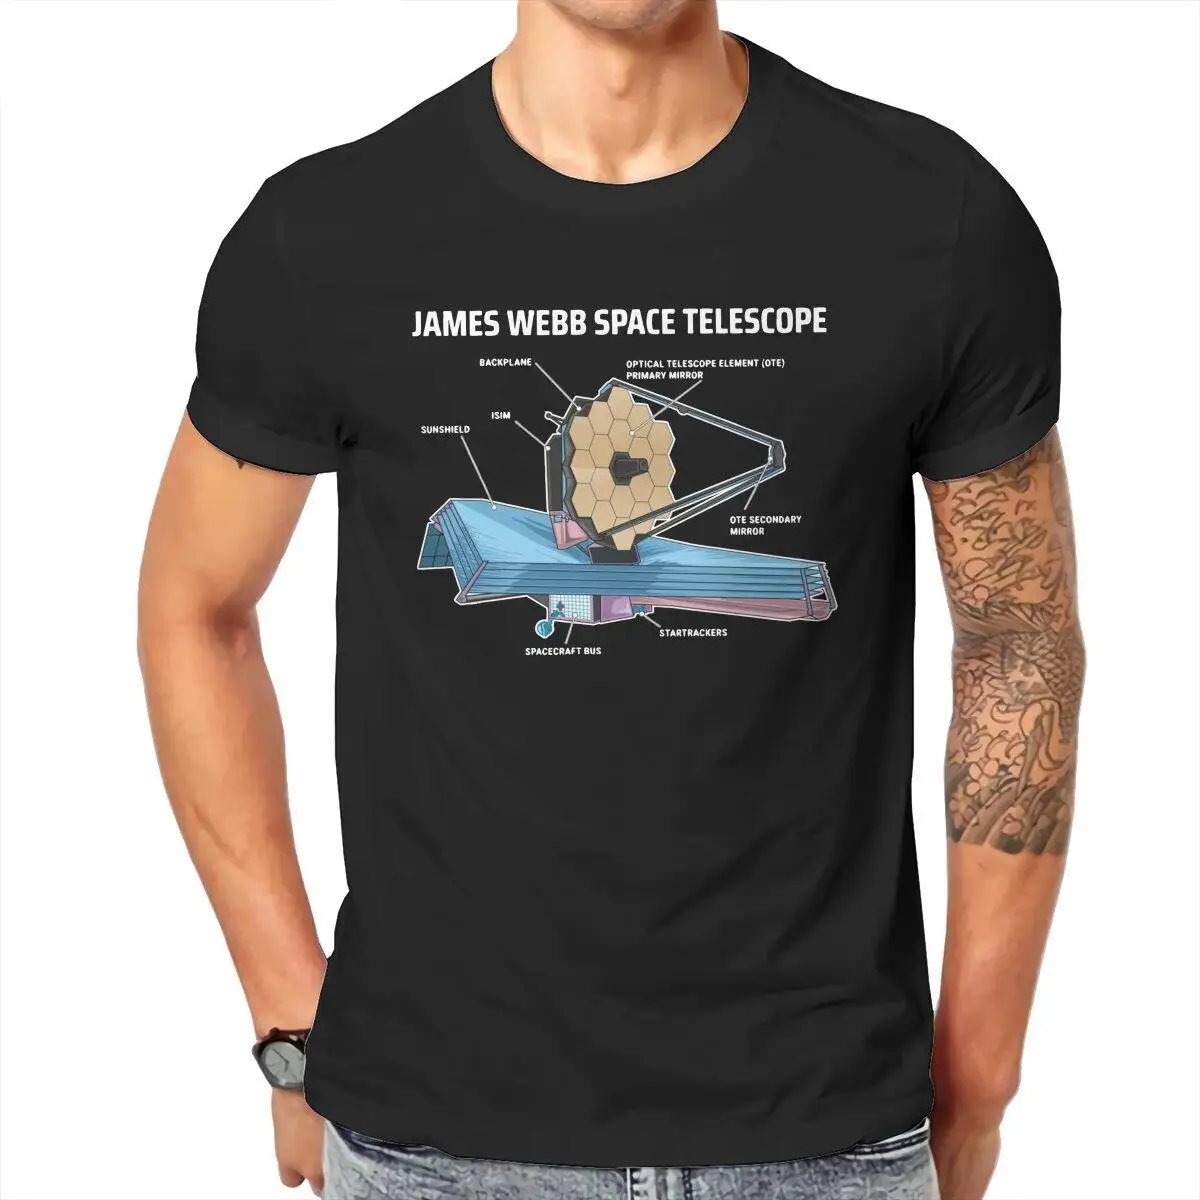 Men's T-Shirts James Webb Space Telescope  Awesome Pure Cotton Tee Shirt Short Sleeve  T Shirt Round Collar Clothes New Arrival